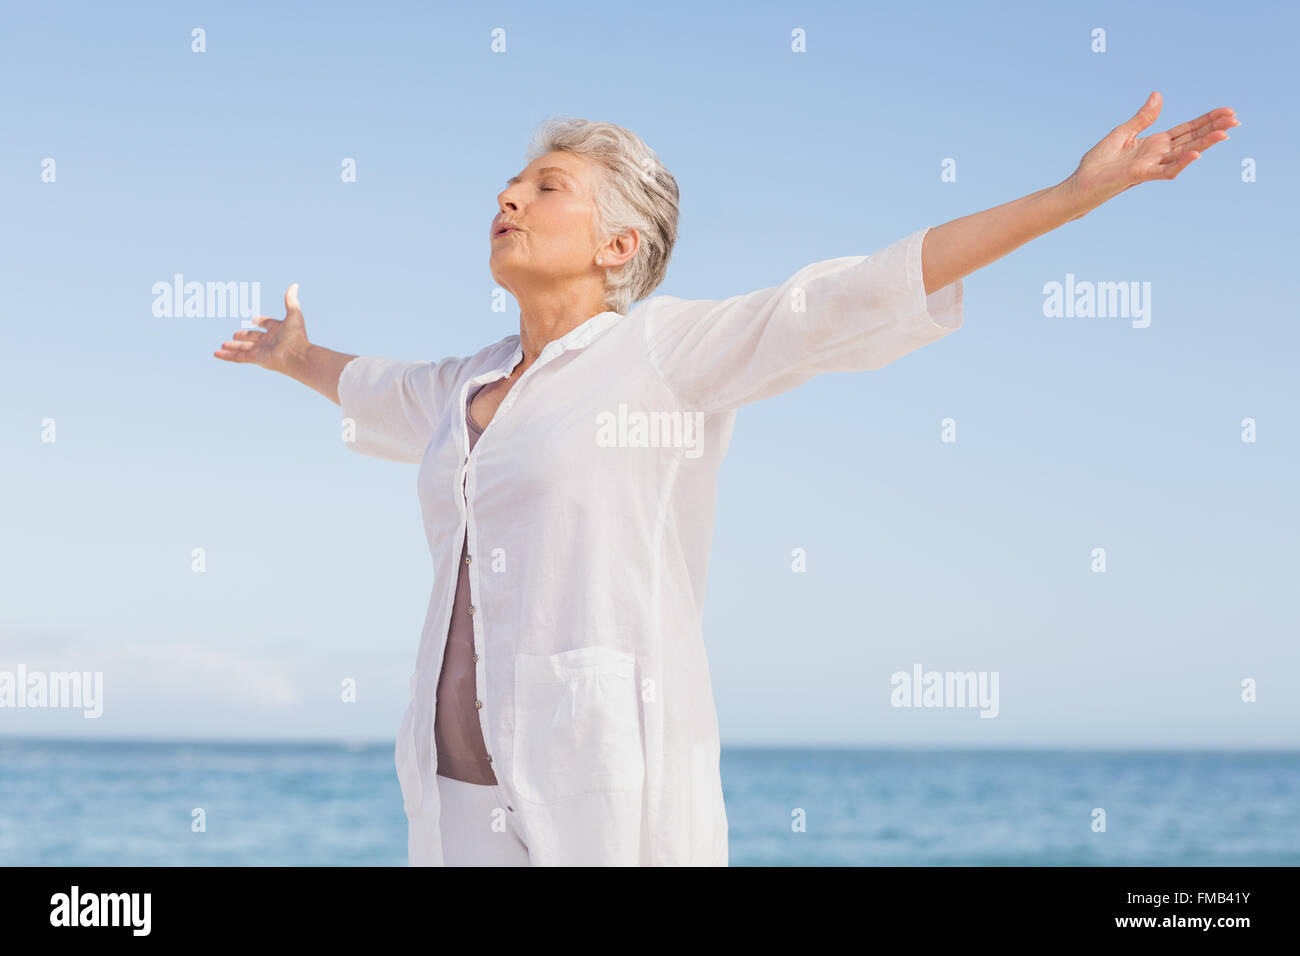 Casual woman with arms outstretched Banque D'Images